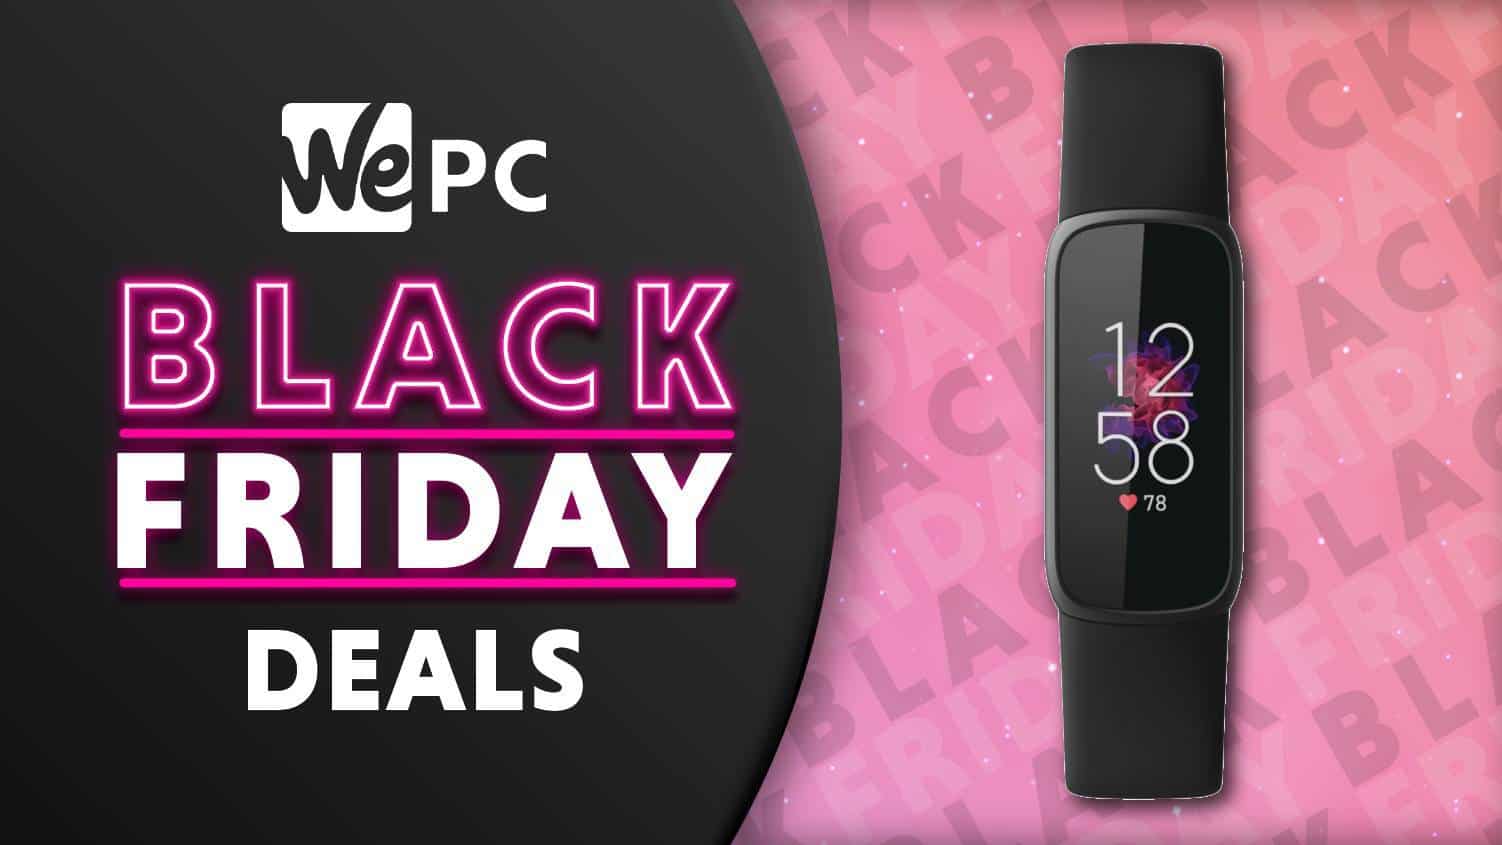 Fitbit Cyber Monday deals – Save $50 on the Fitbit Luxe early Black Friday deals